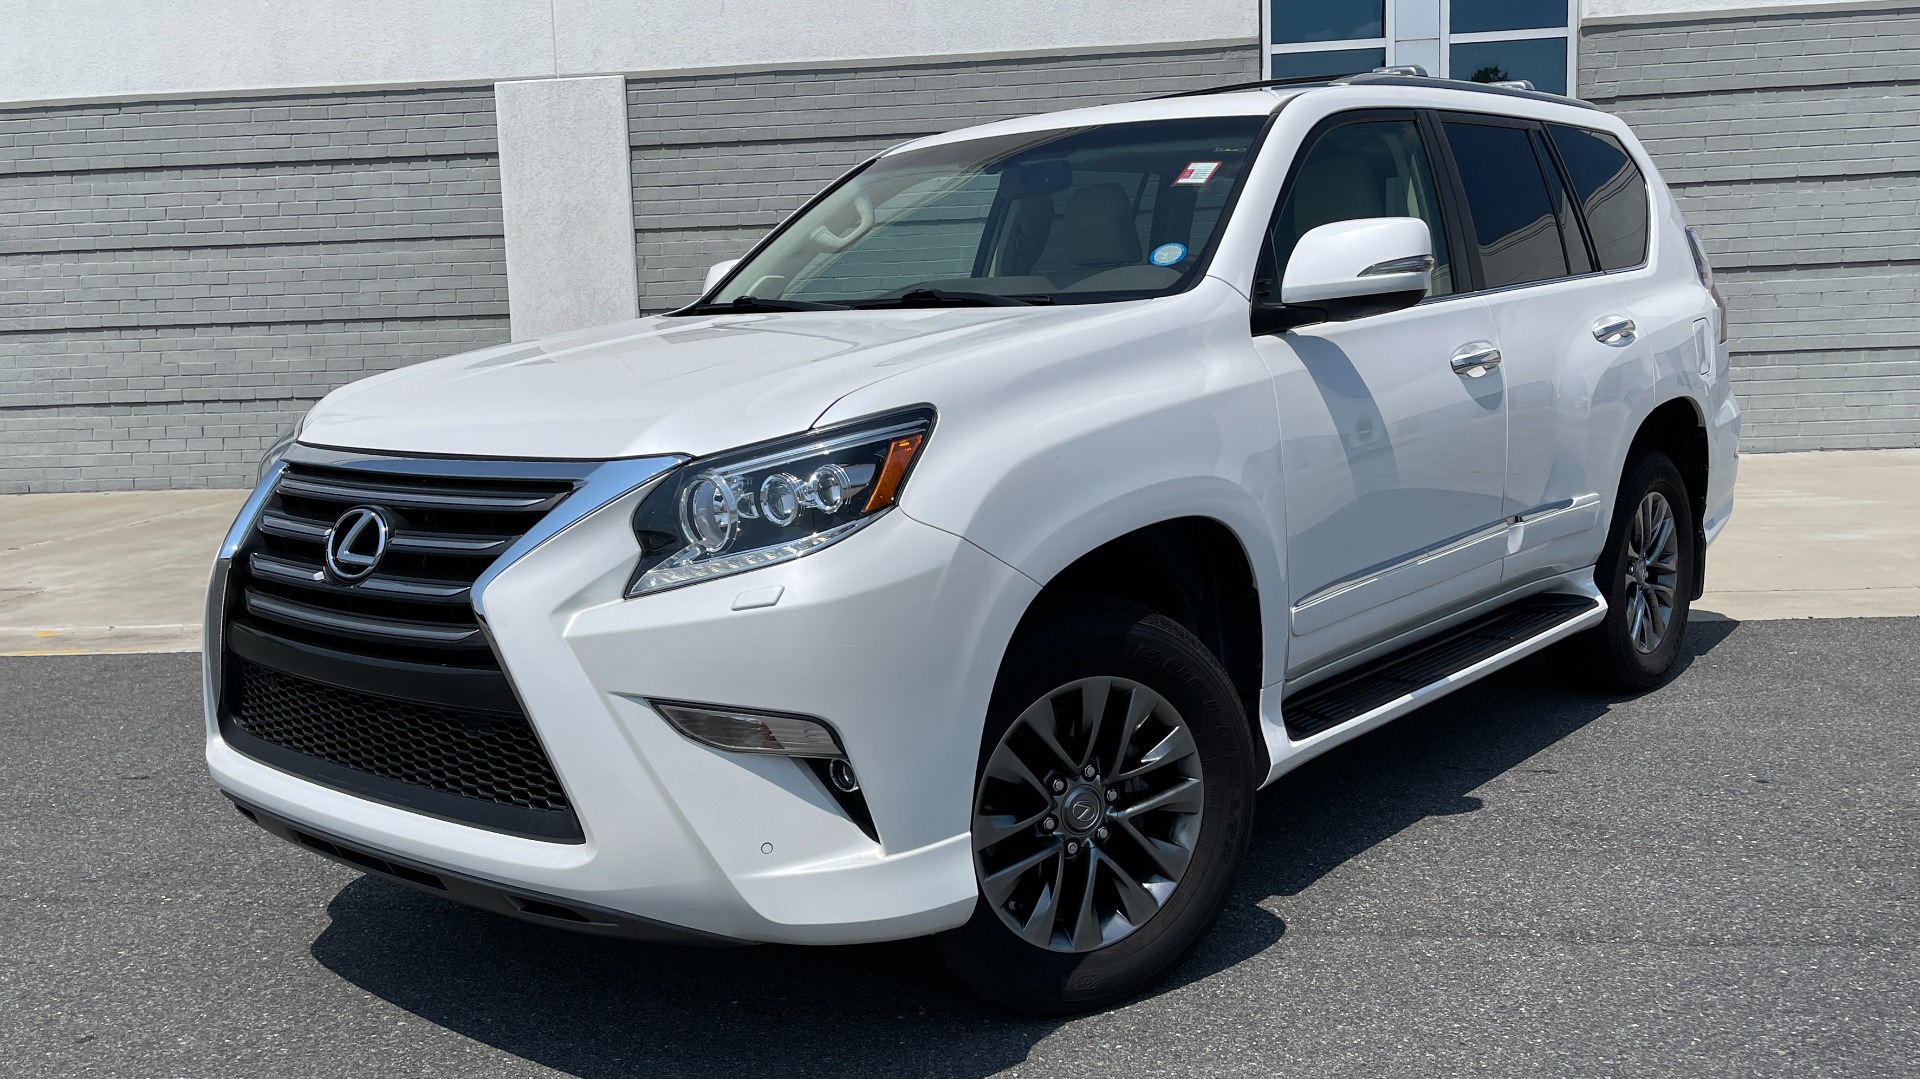 Used 2015 Lexus GX 460 LUXURY / 4.6L V8 / 4WD / NAV / SUNROOF / 3-ROW / REARVIEW for sale Sold at Formula Imports in Charlotte NC 28227 1